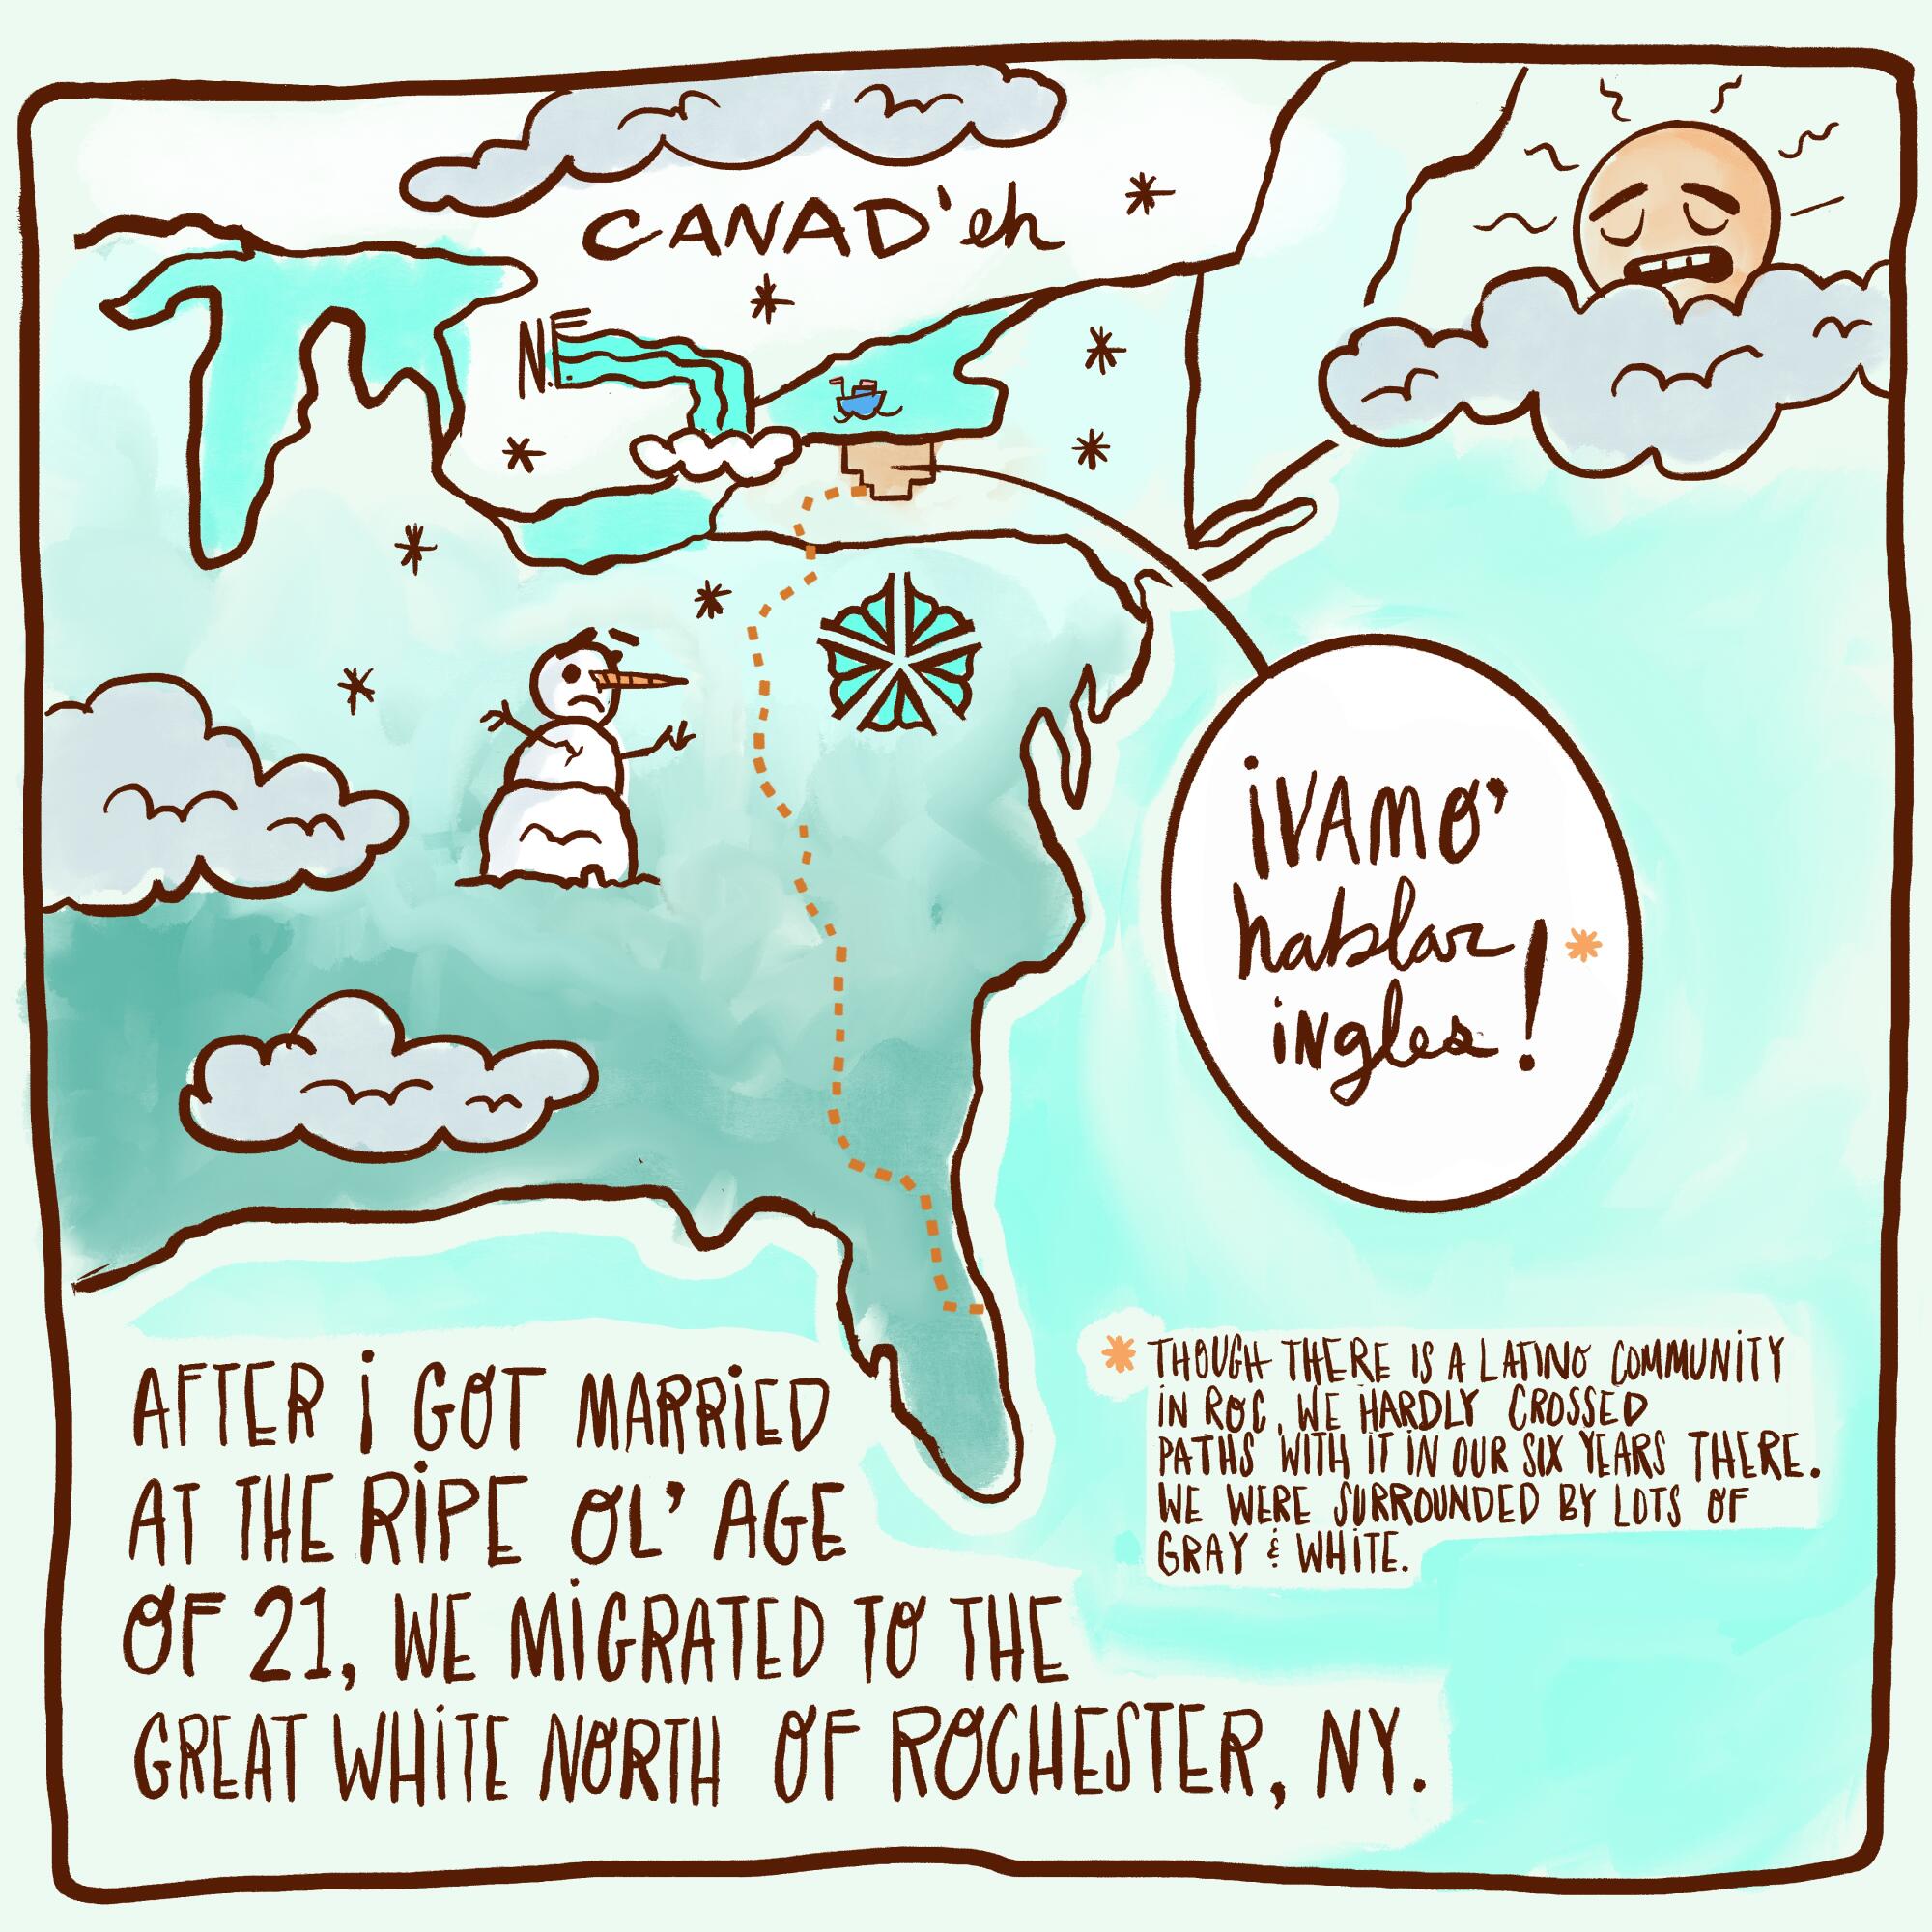 After marrying at the ripe ol' age of 21, we migrated to the great white north of Rochester, N.Y. 